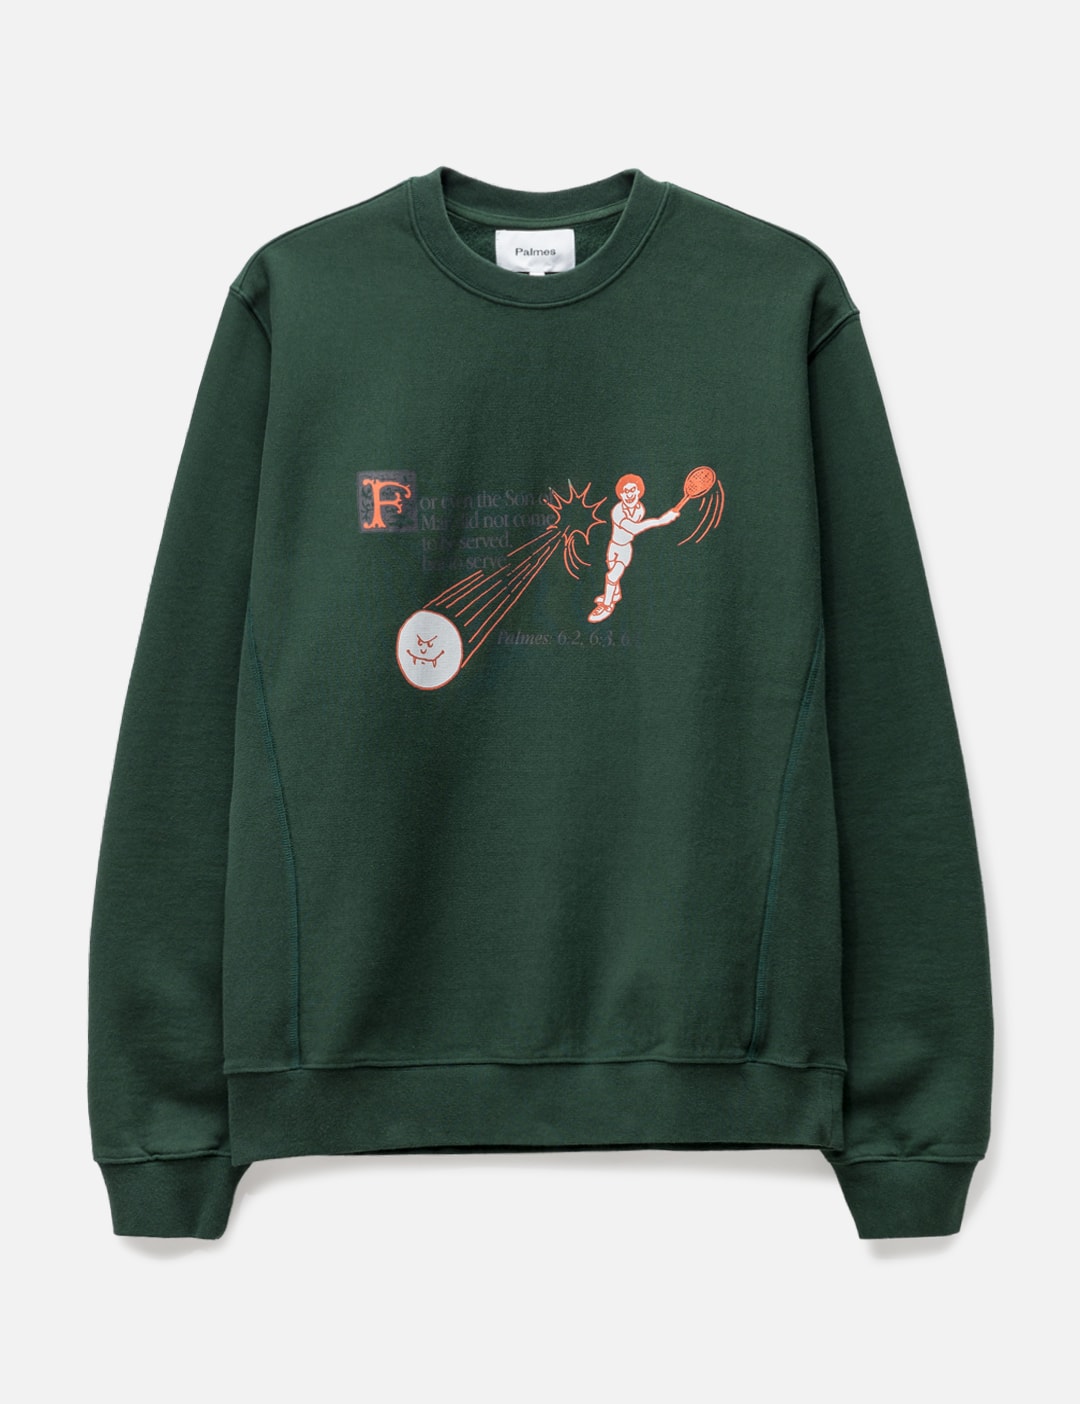 Palmes - Verse Crewneck | HBX - Globally Curated Fashion and Lifestyle ...